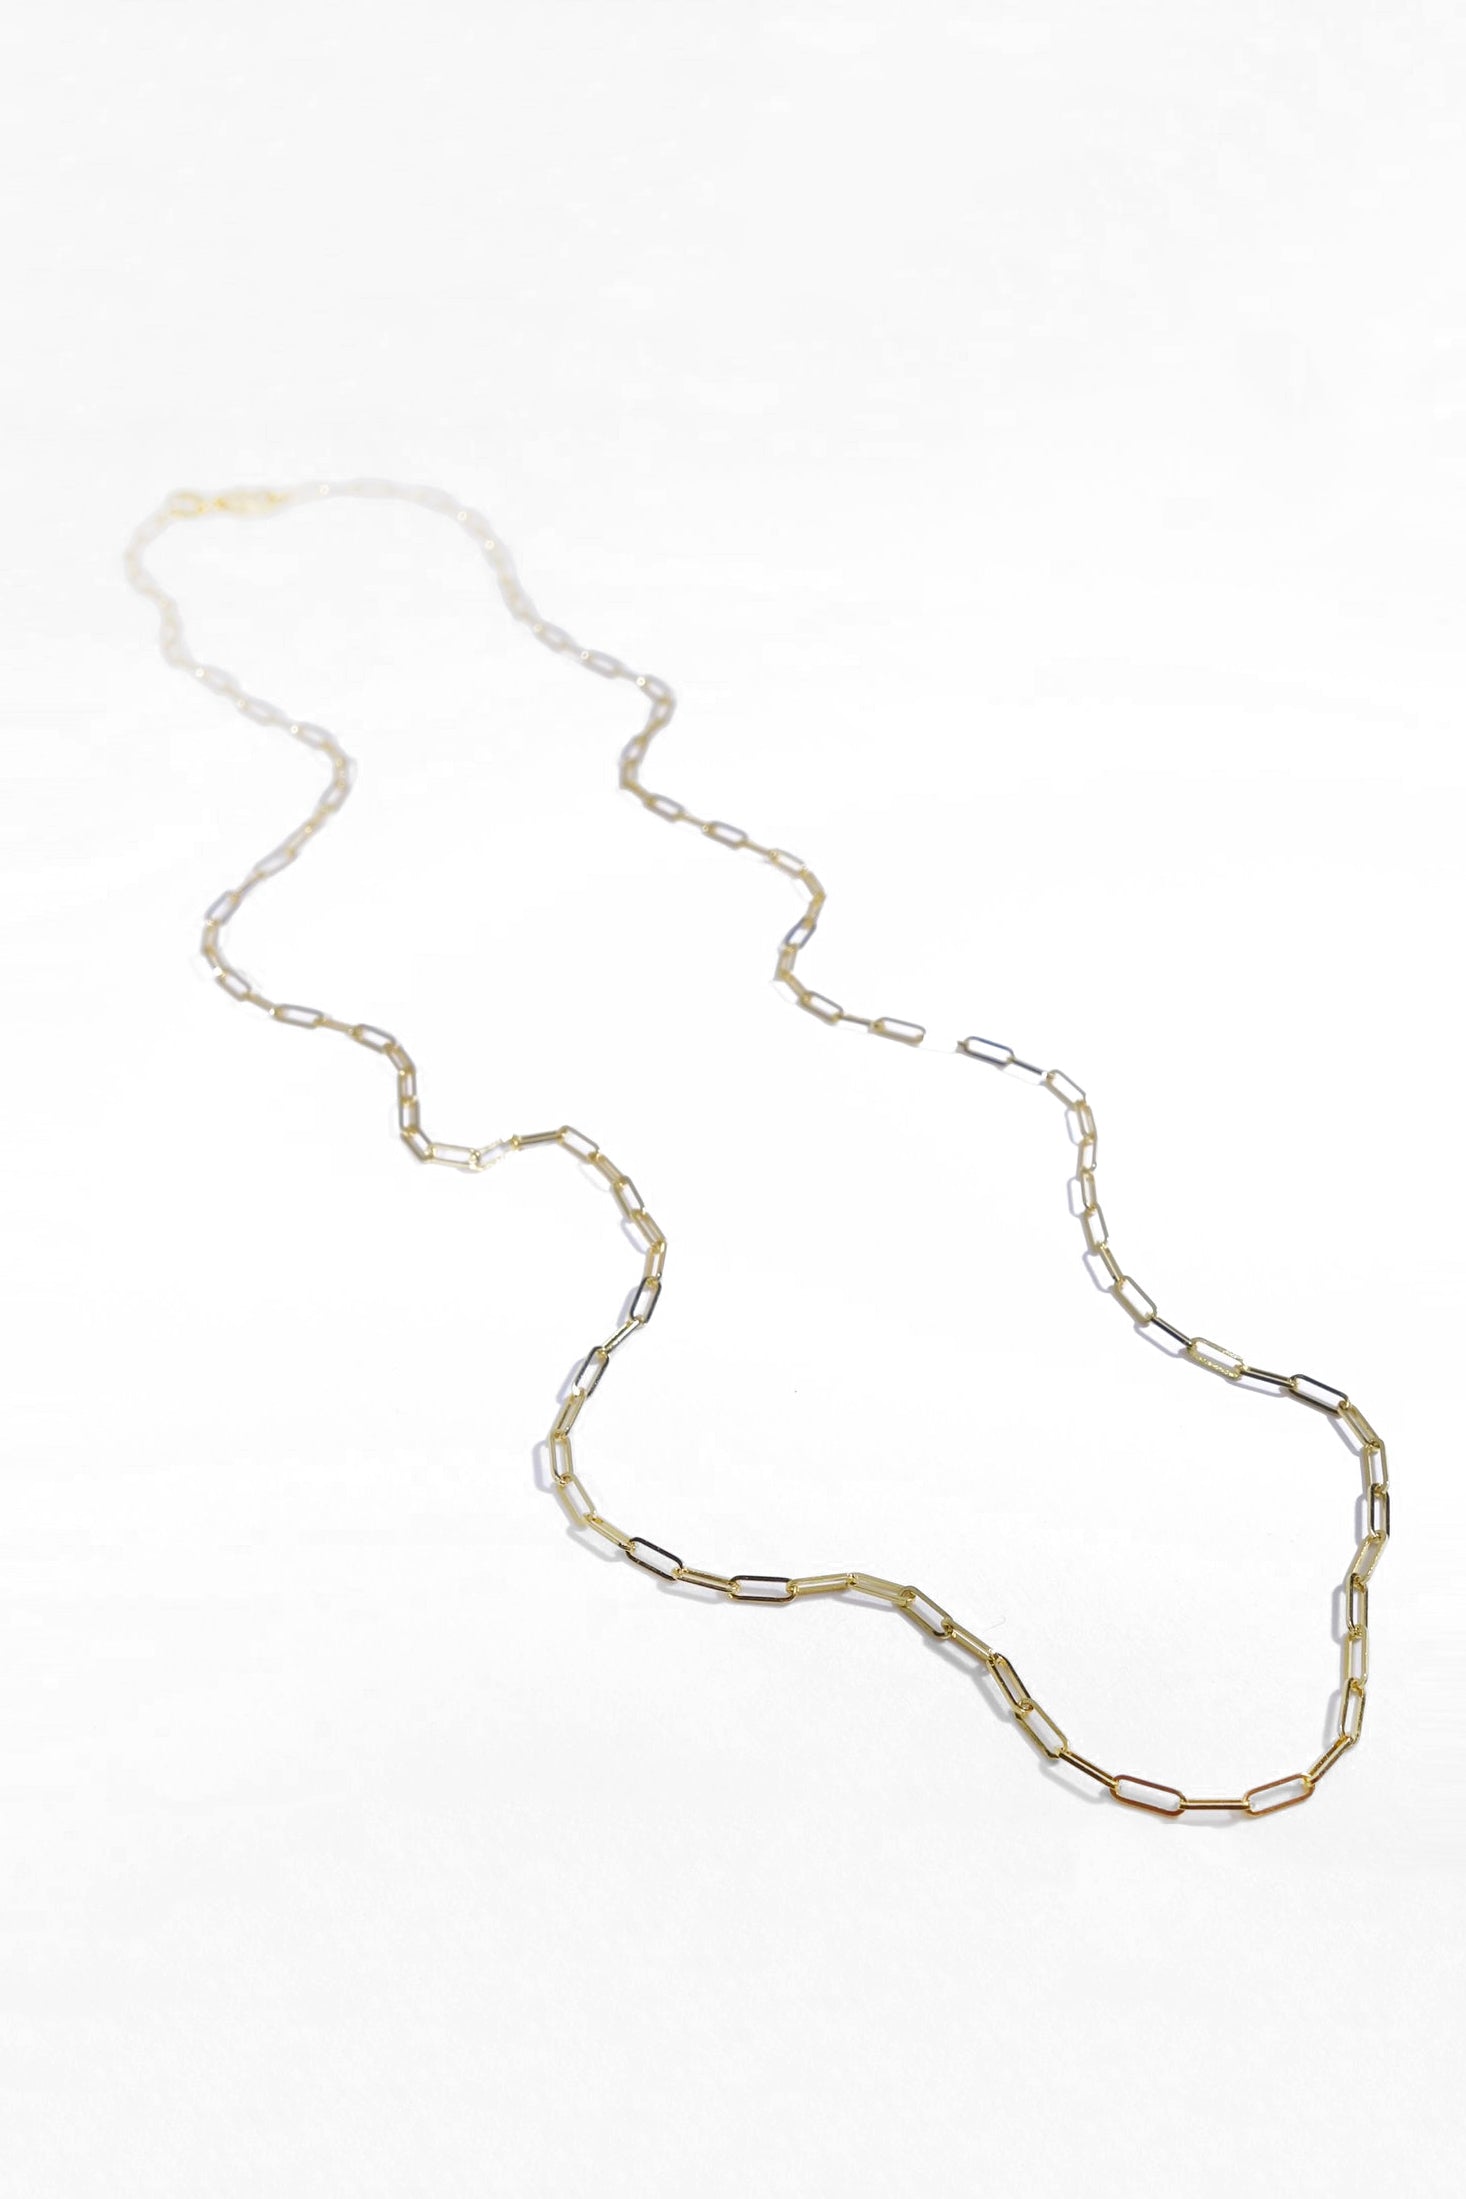 Skinny Linked Paperclip Chain in 14k Gold